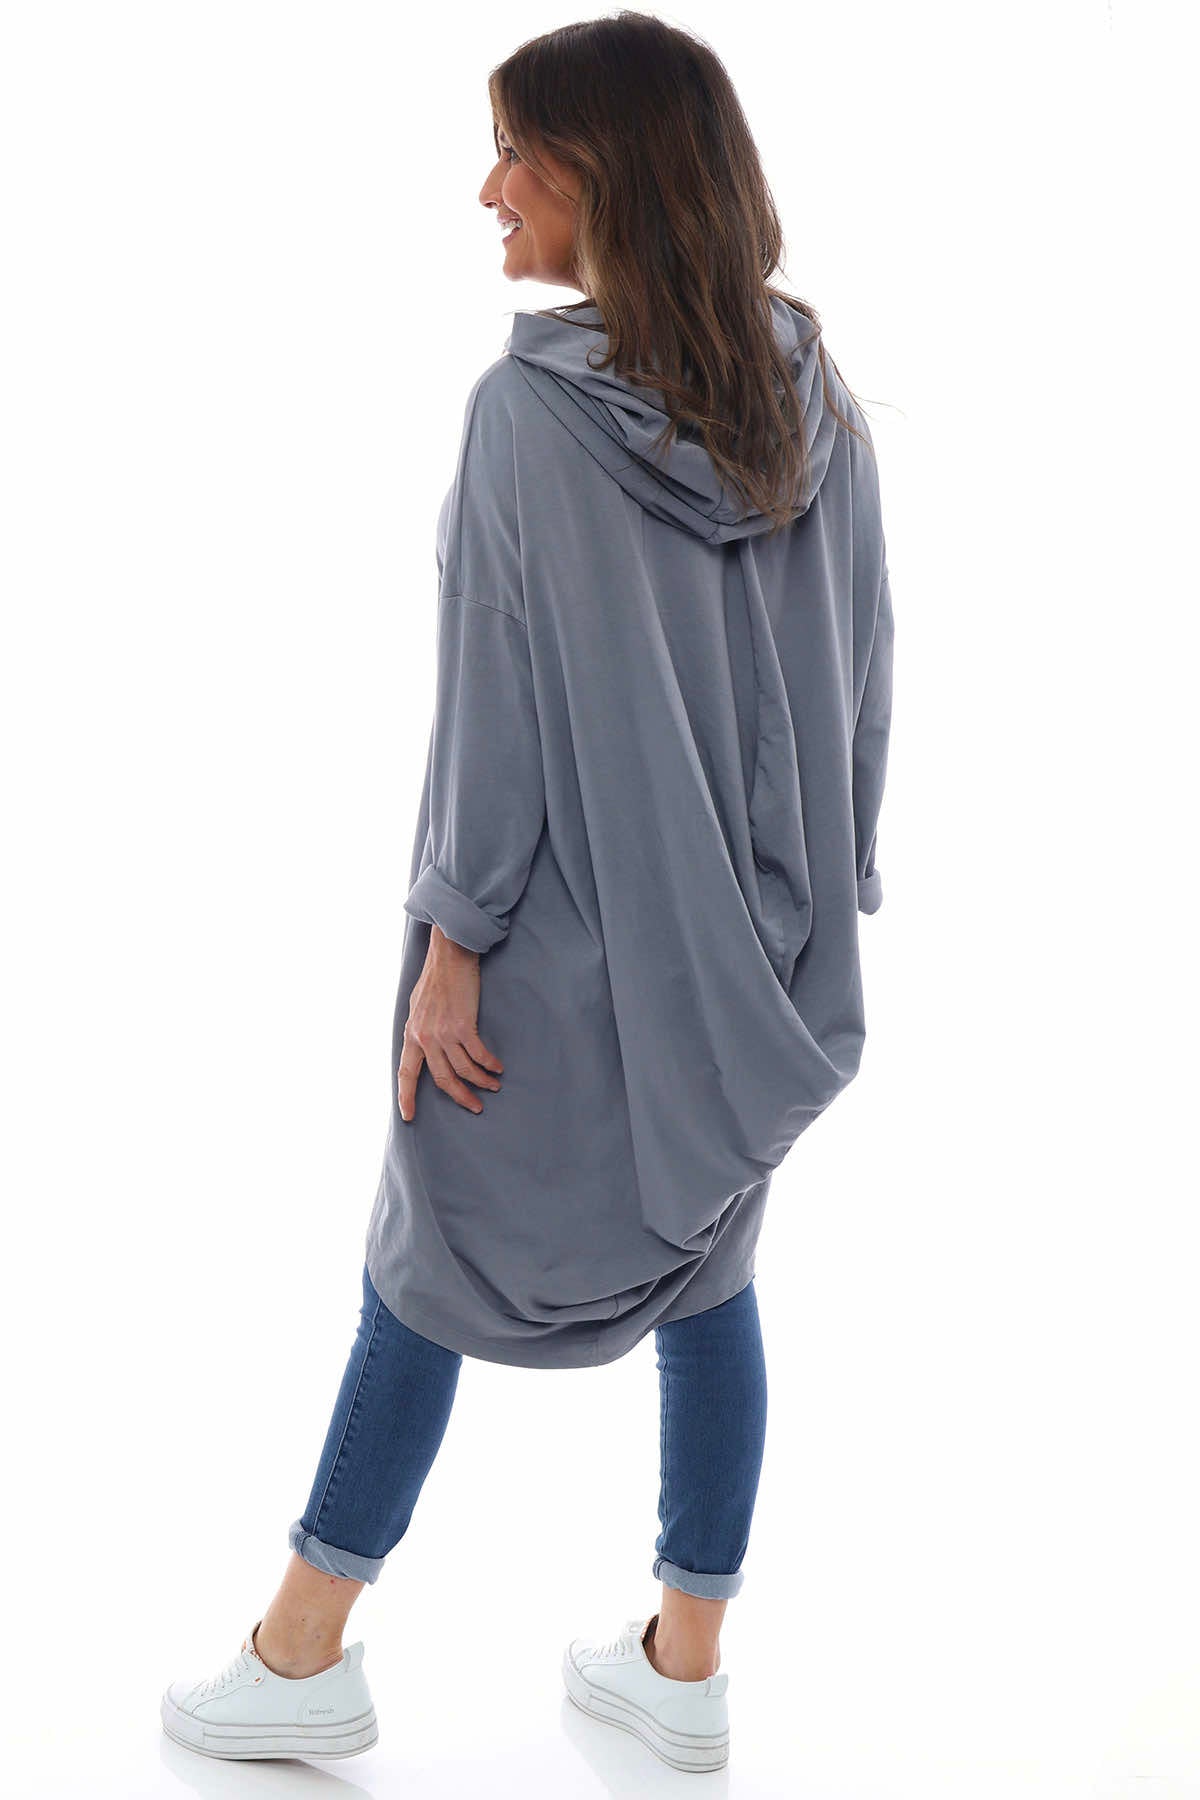 Lorena Cowl Hooded Cotton Top Mid Grey